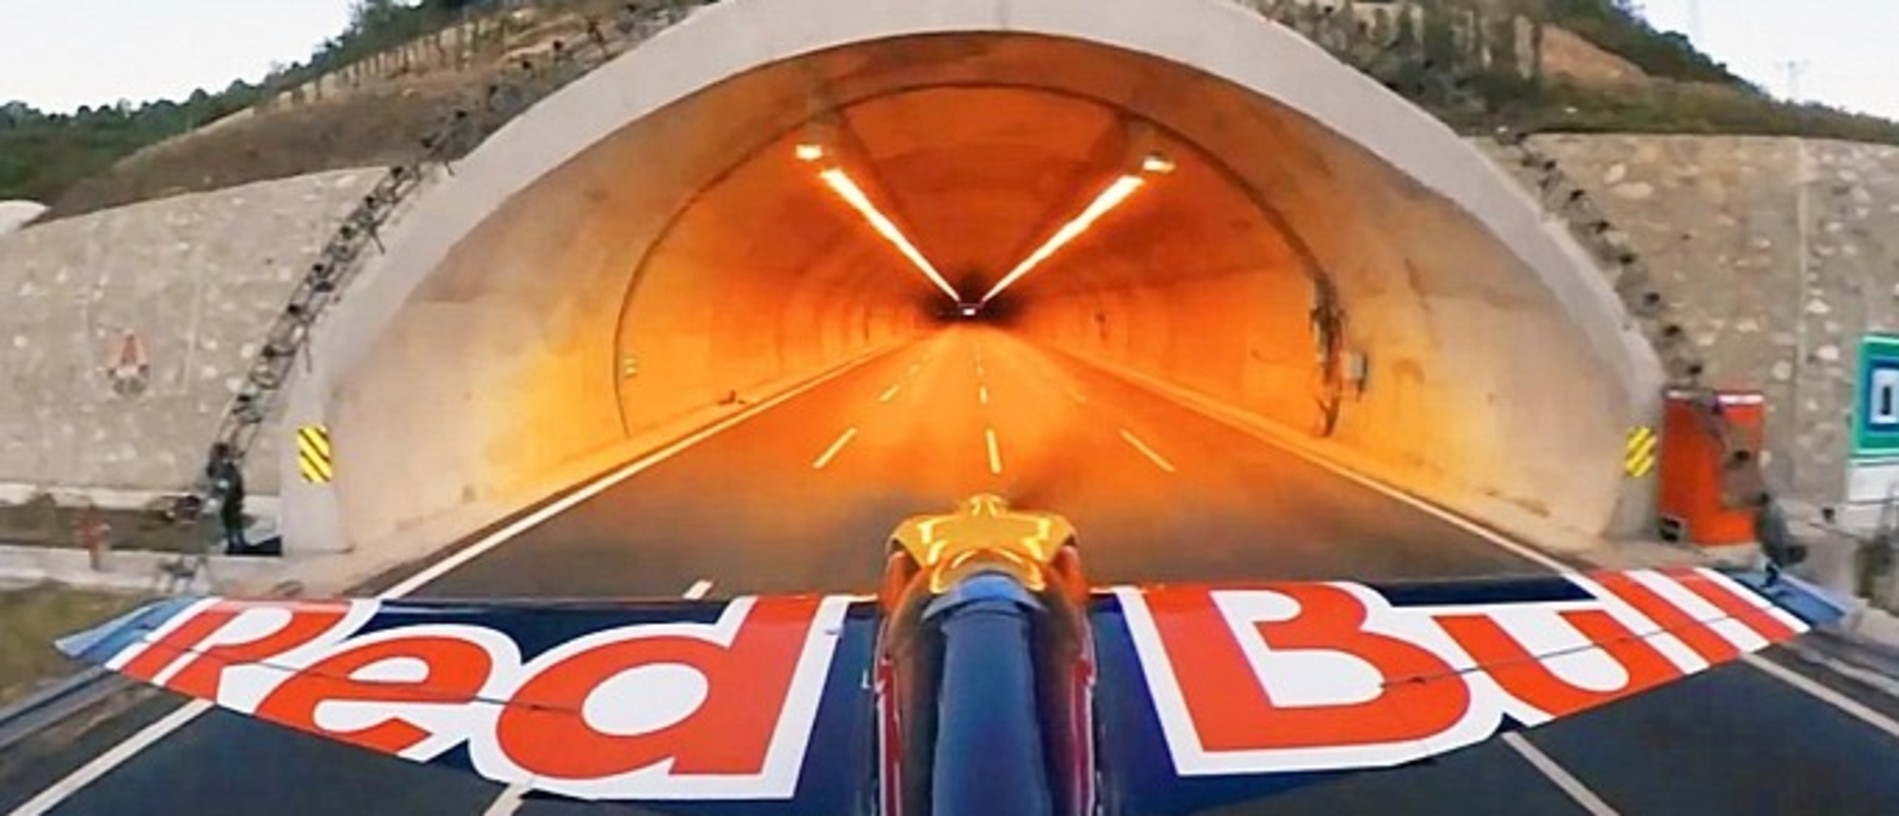 The moment the plane entered the tunnel.